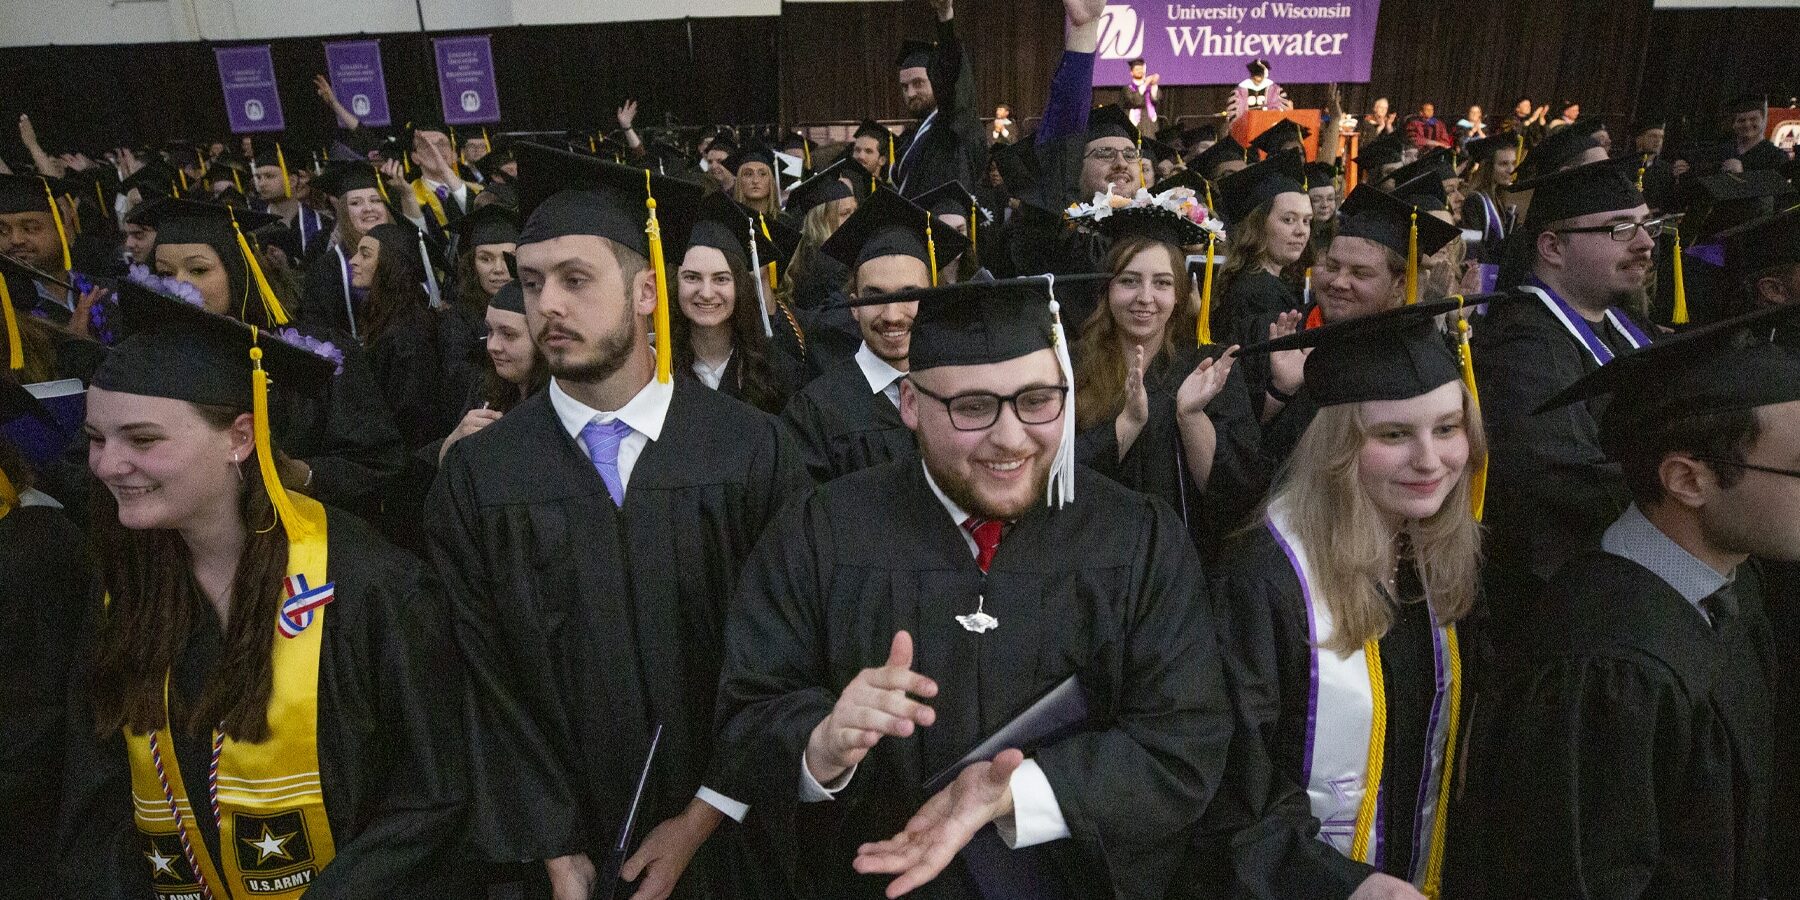 Students applaud family members for their support at the end of the afternoon commencement ceremony. UW-Whitewater held its spring Commencement on Saturday, May 13, 2023 with two ceremonies at Kachel Fieldhouse. (UW-Whitewater photo/Craig Schreiner)